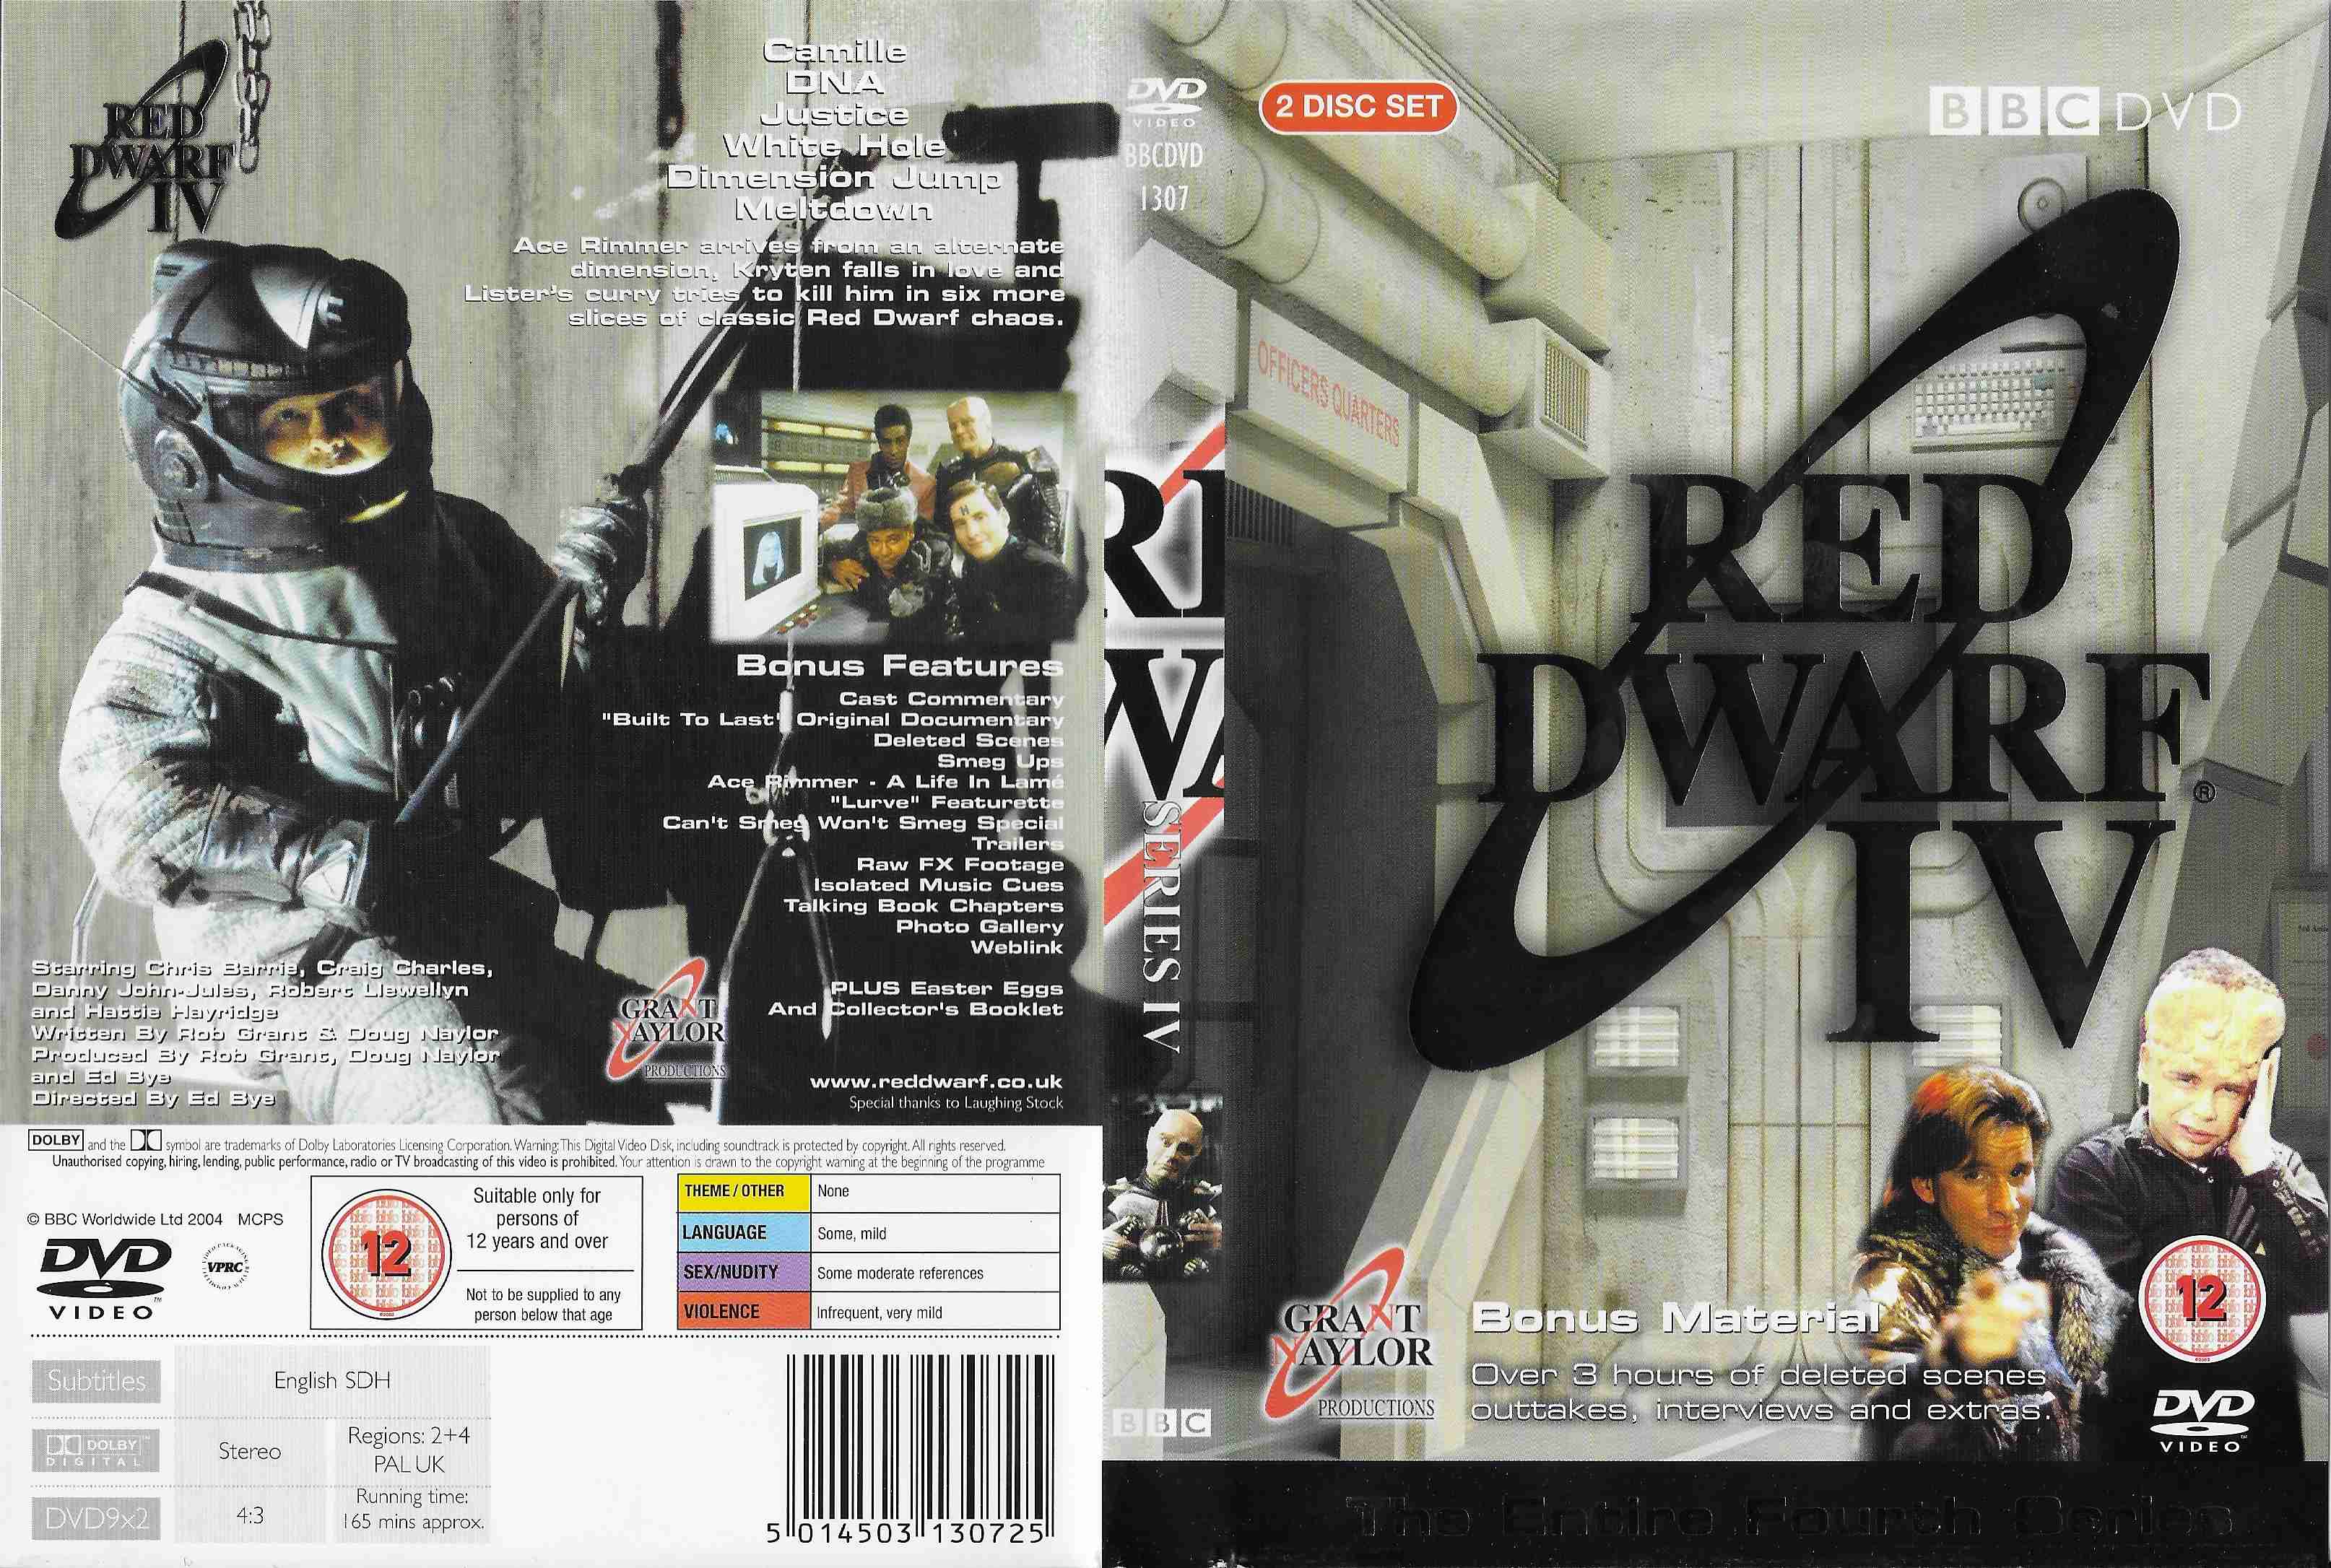 Picture of BBCDVD 1307 Red dwarf - Series IV by artist Rob Grant / Doug Naylor from the BBC records and Tapes library